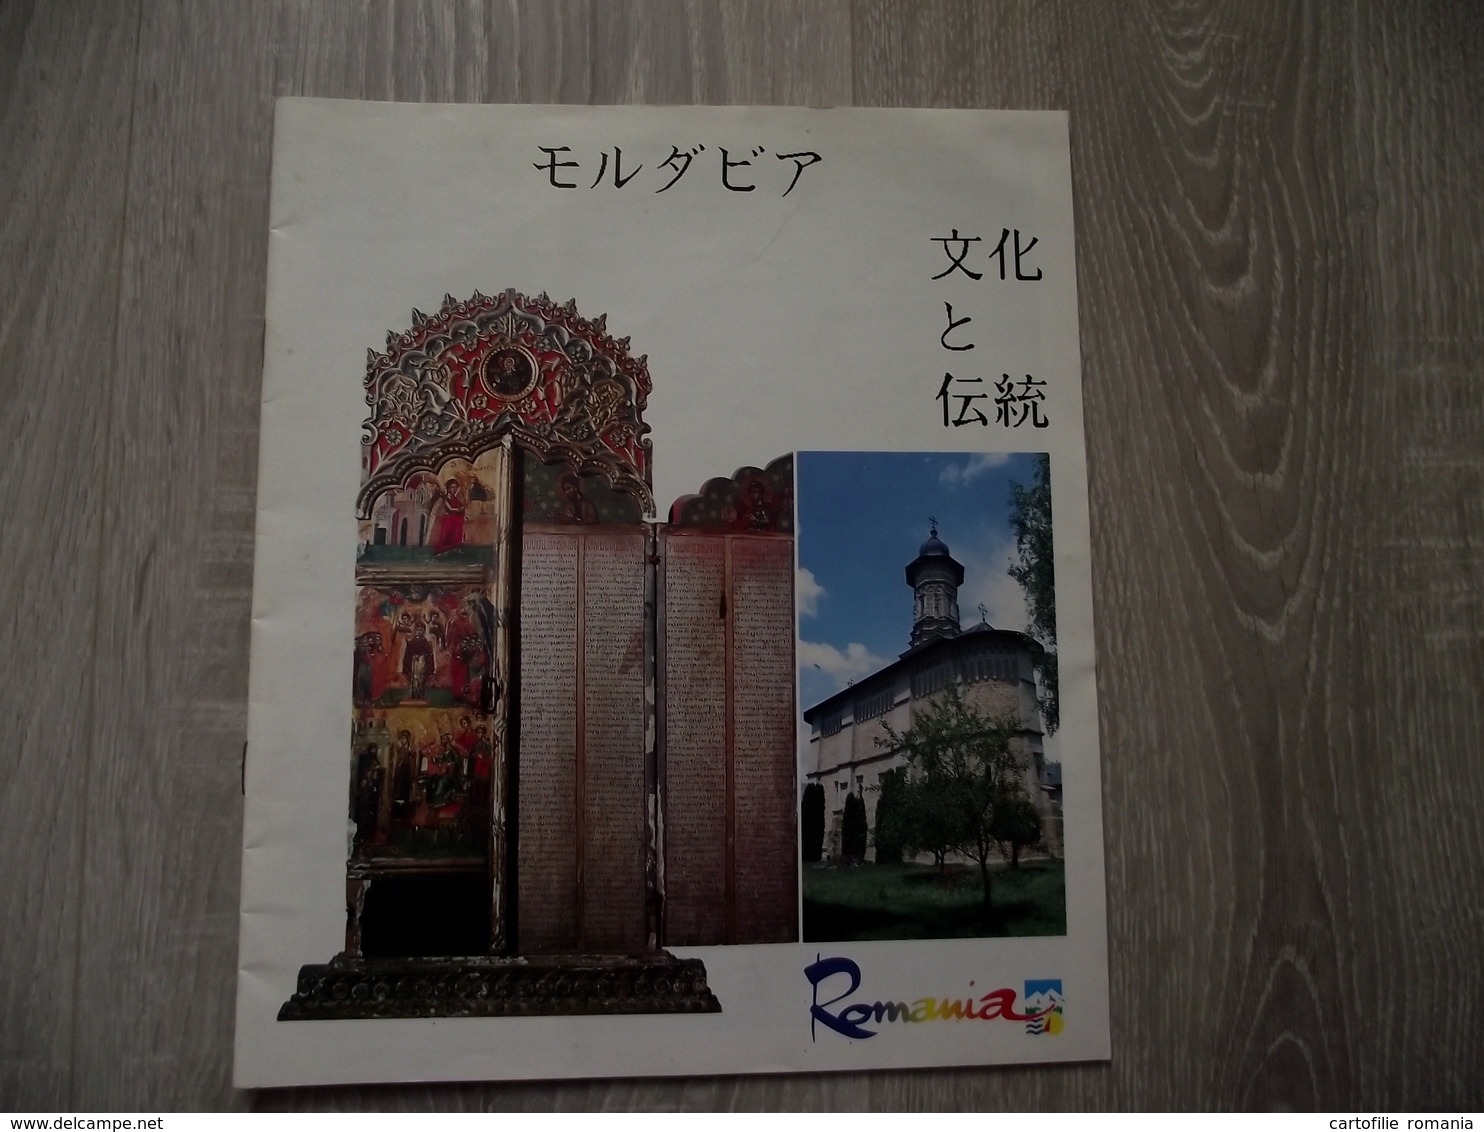 China Chine - Romania - Bukowina Bucovina Tourism Guide - Illustrated Edition - 15 Pages - Map Karte Carte - See Scans - Tourismus